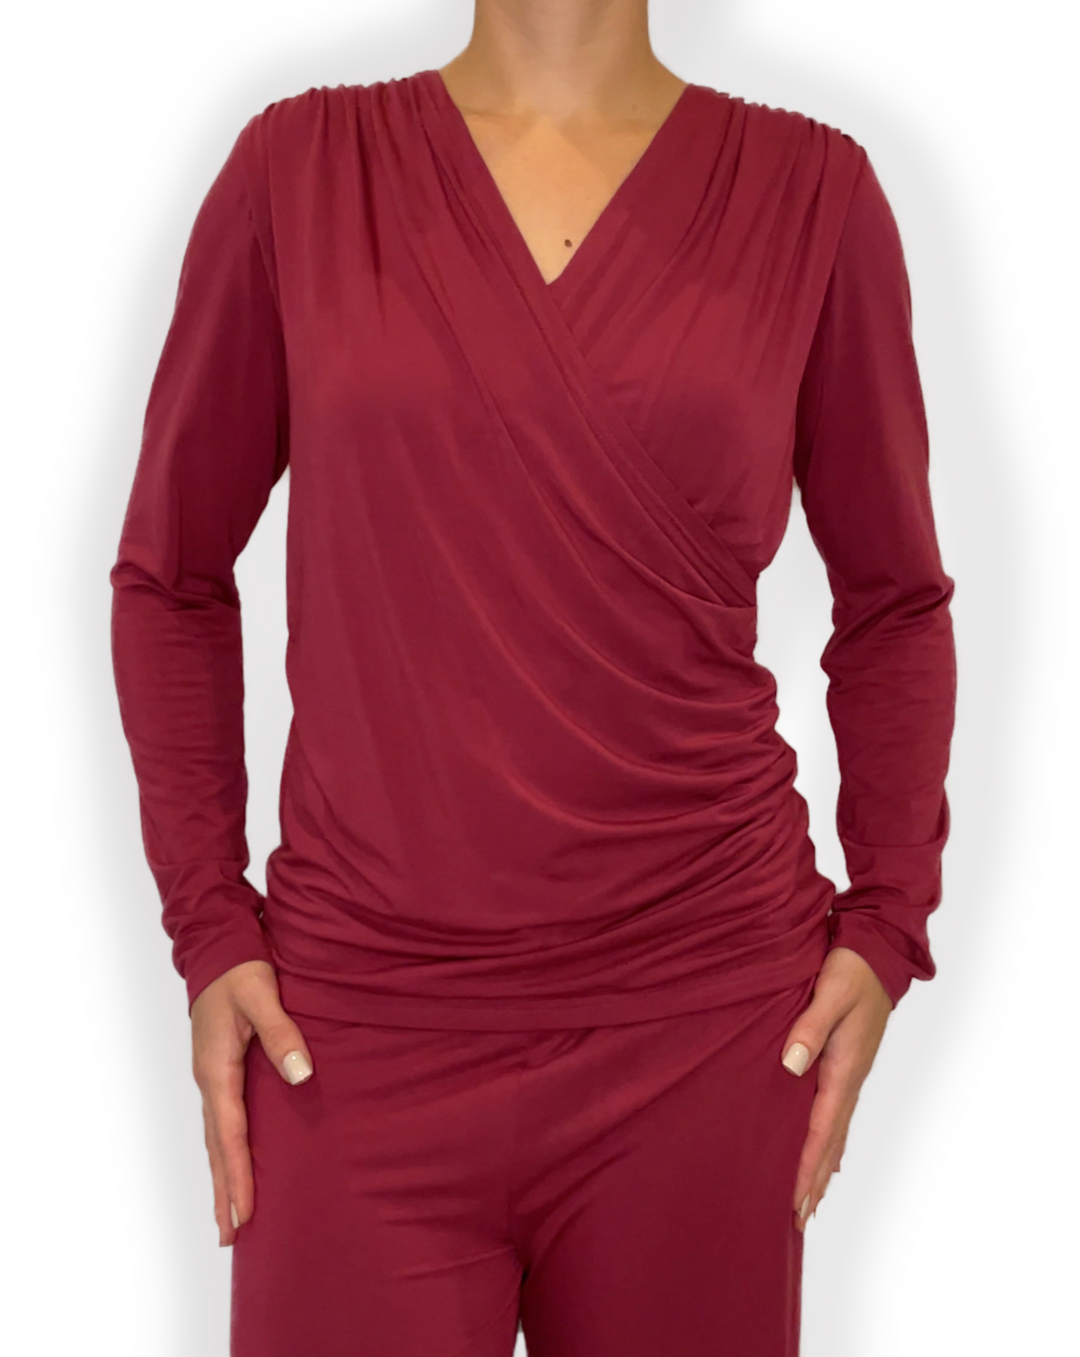 jia and kate ROSIE Braless Bamboo Wrap Top Long Sleeve in berry red color